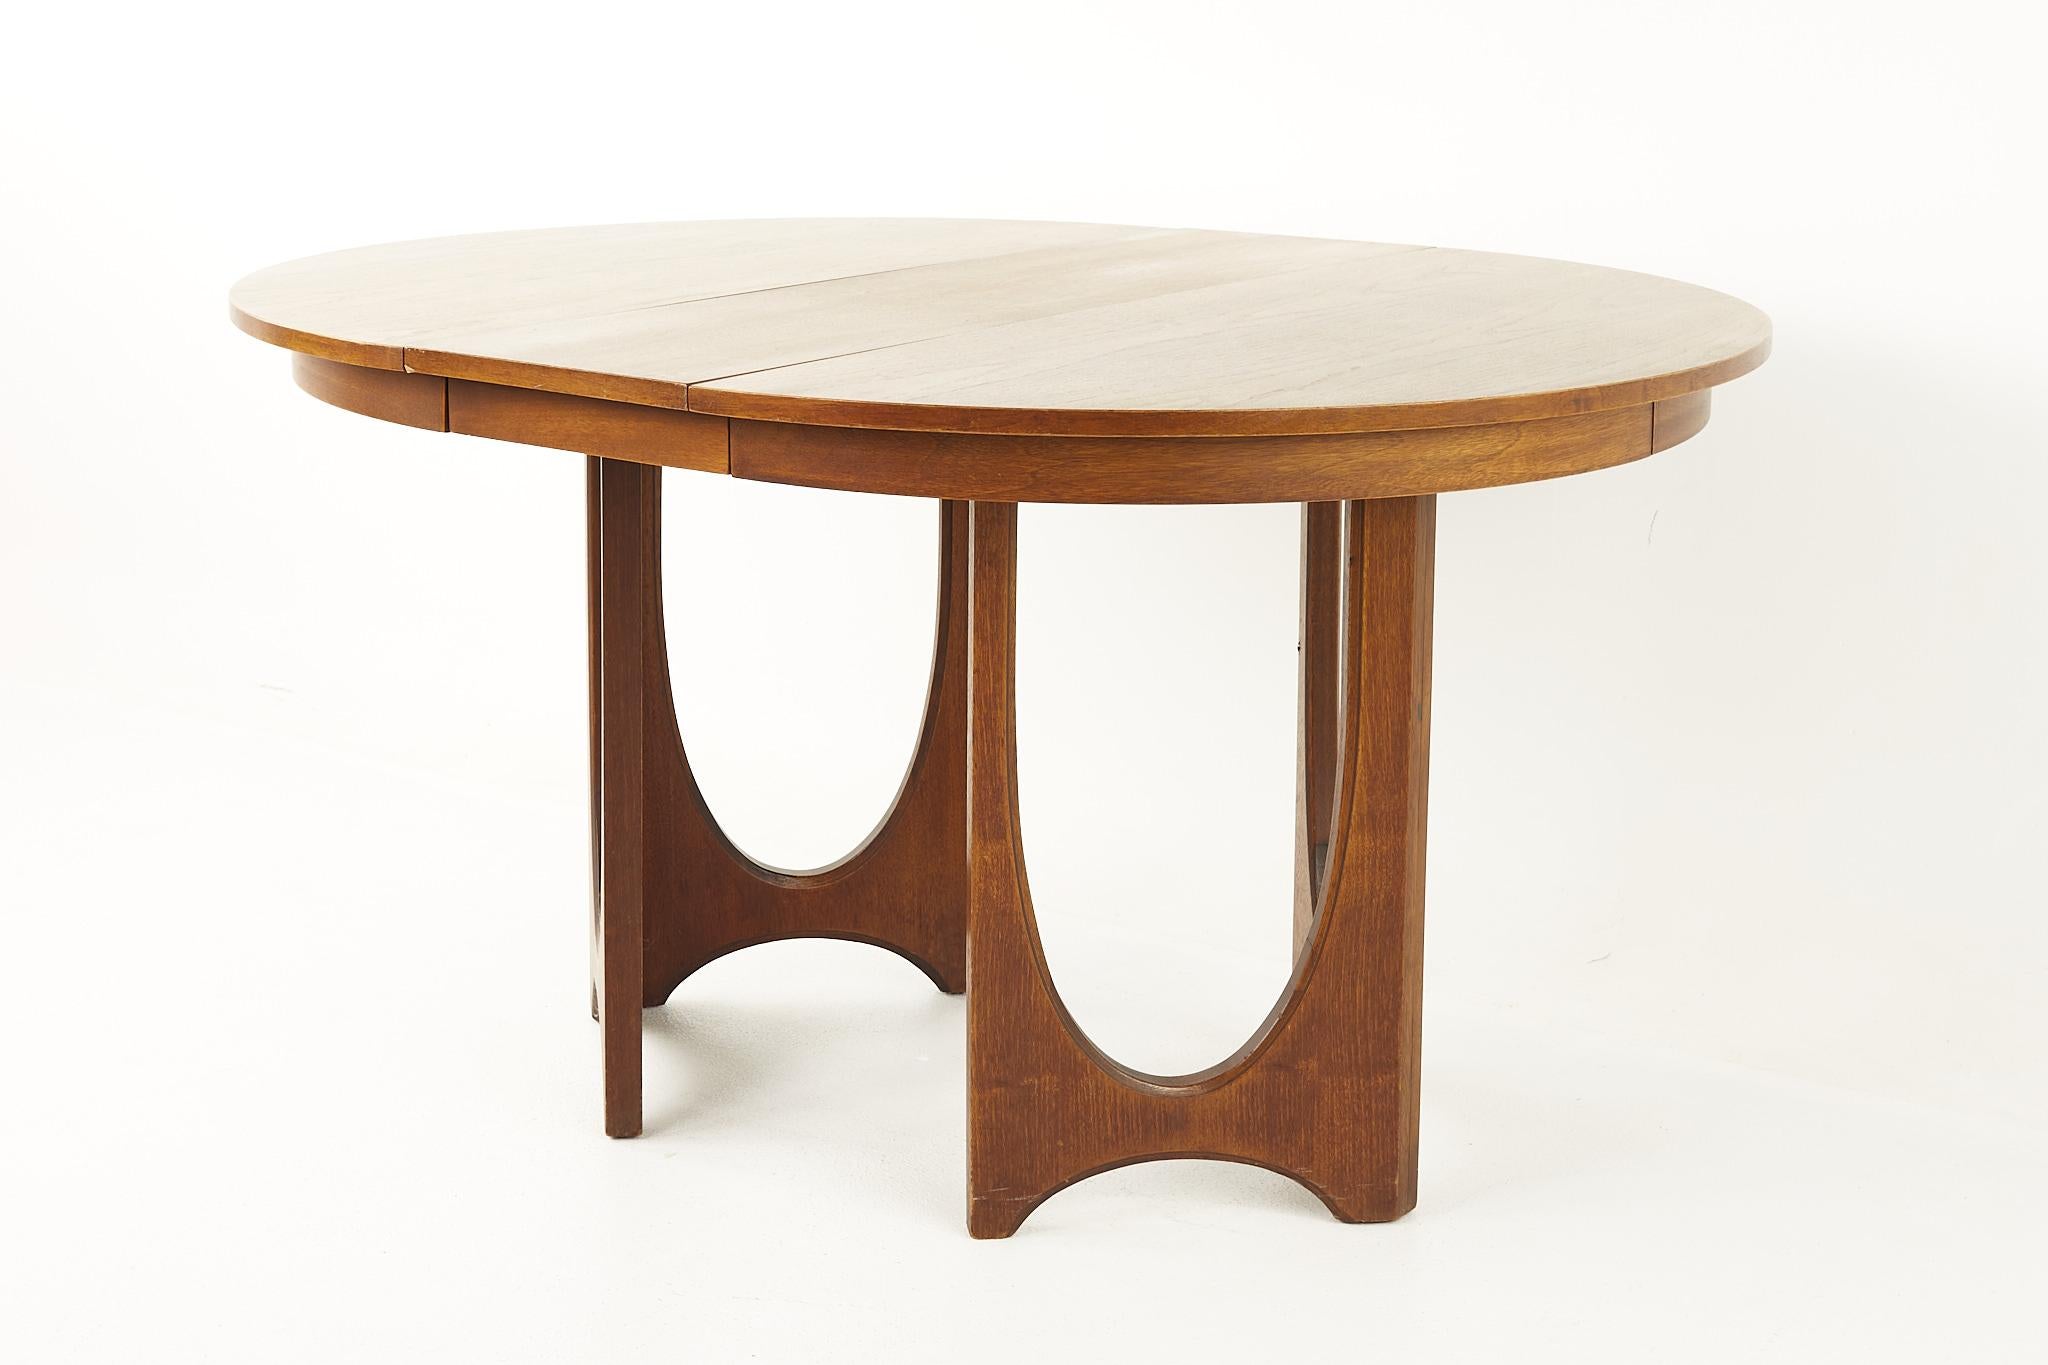 Broyhill Brasilia Mid Century Round Walnut Pedestal Dining Table - 2 Leaves In Good Condition In Countryside, IL